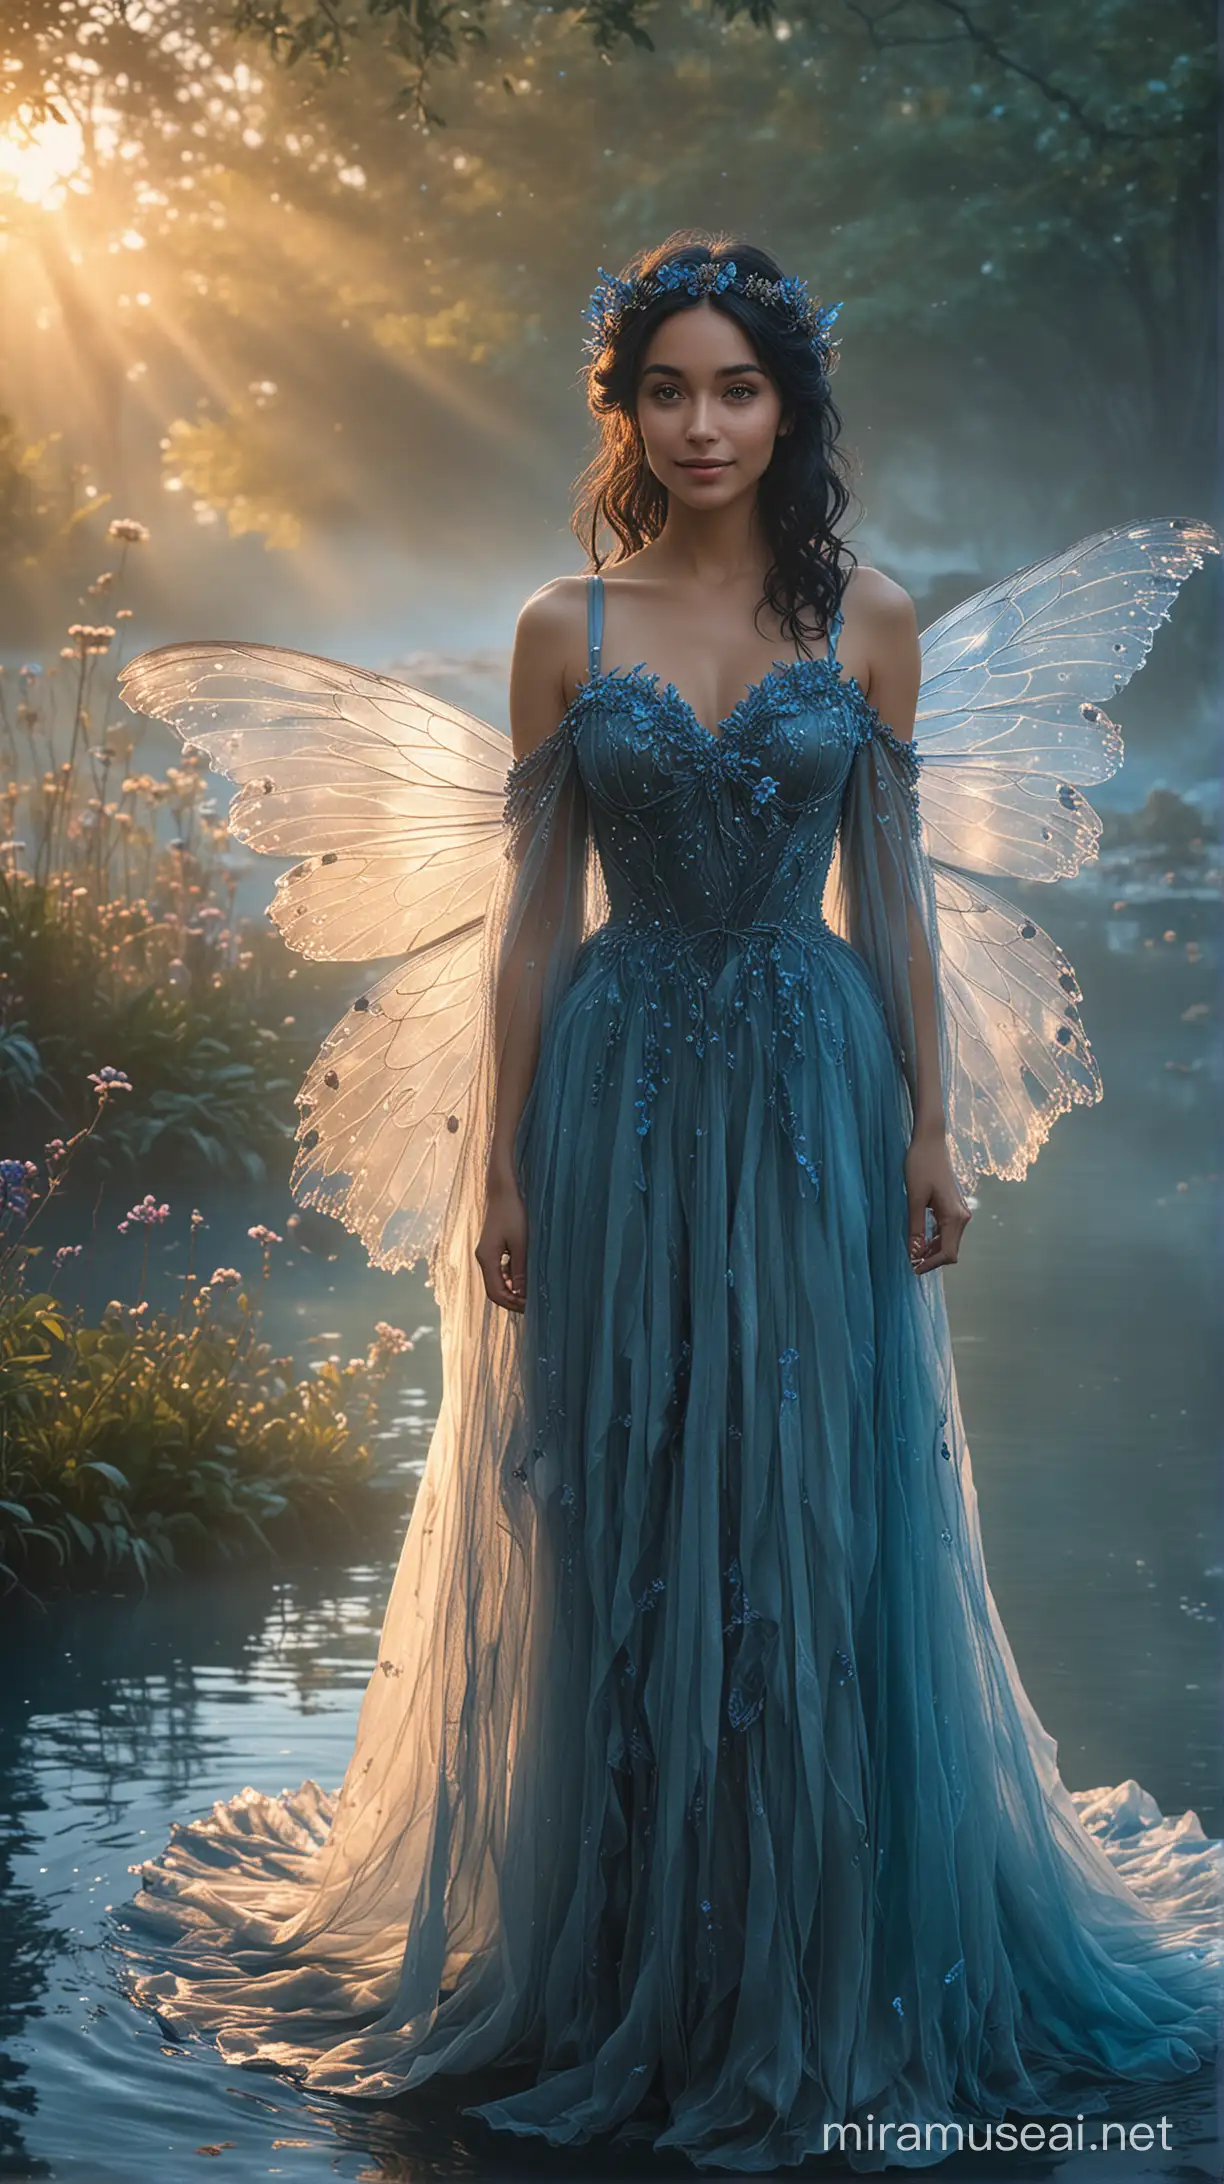 Hyper-realistic photo of beautiful fairy. Subject has huge real fairy wings. Subject has raven-black hair. Subject is wearing a very long flowering gown. Subject is in an enchanted forest. Subject is smiling at the camera. Crystal clear blue lagoon. Fog, sunset glow. Blurred background. High definition, raw style.